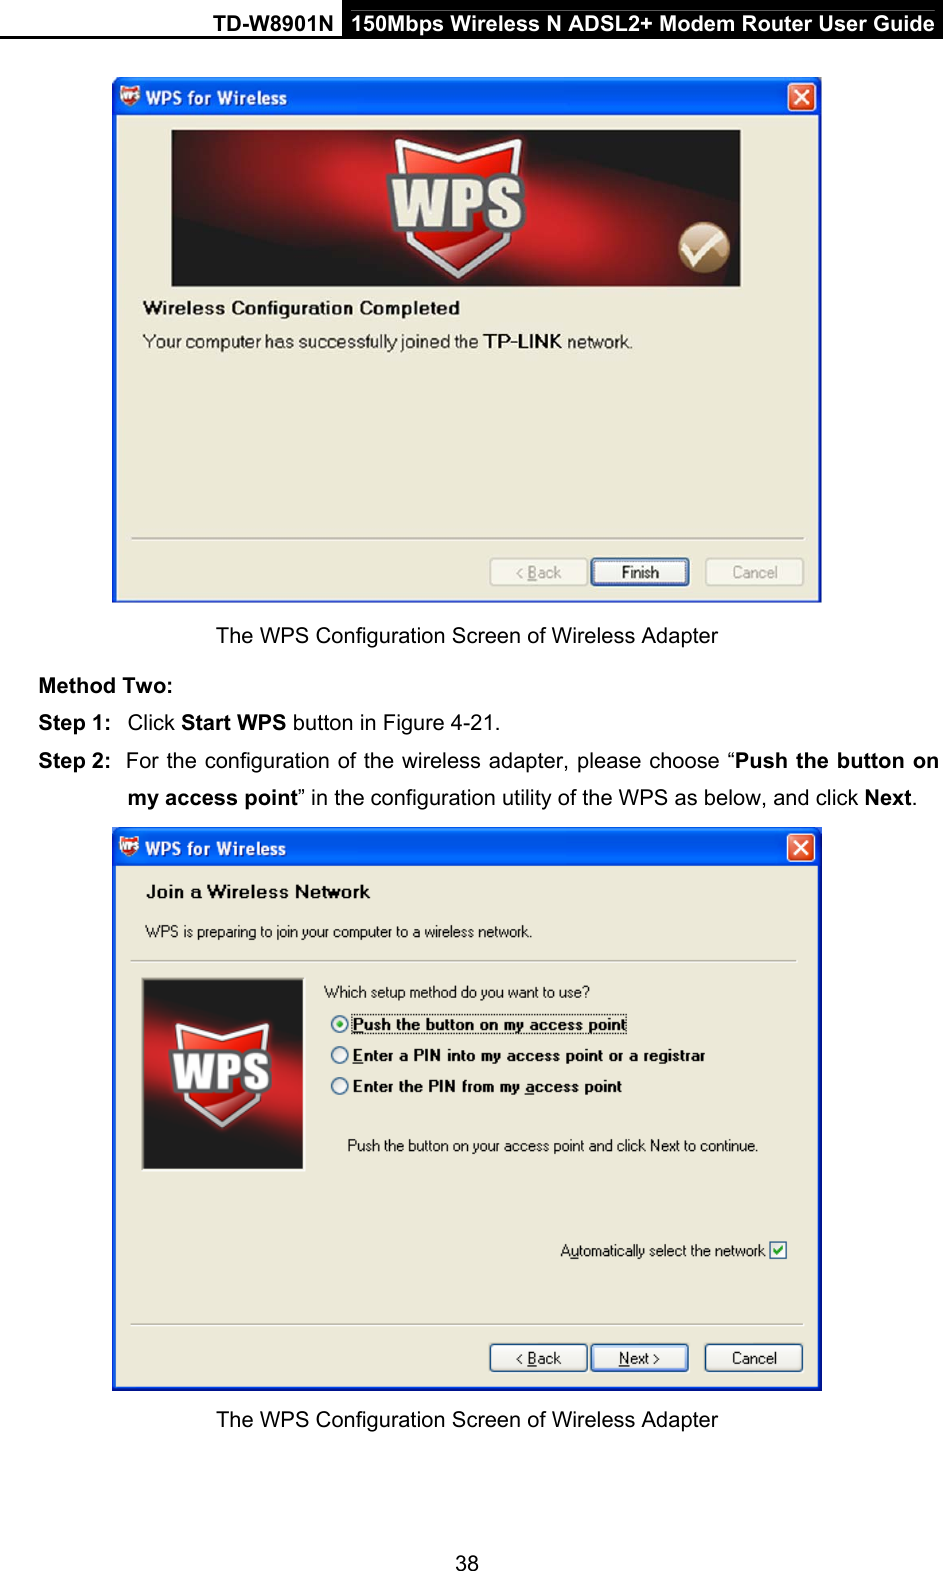 TD-W8901N  150Mbps Wireless N ADSL2+ Modem Router User Guide 38  The WPS Configuration Screen of Wireless Adapter   Method Two: Step 1:  Click Start WPS button in Figure 4-21. Step 2:  For the configuration of the wireless adapter, please choose “Push the button on my access point” in the configuration utility of the WPS as below, and click Next.   The WPS Configuration Screen of Wireless Adapter 